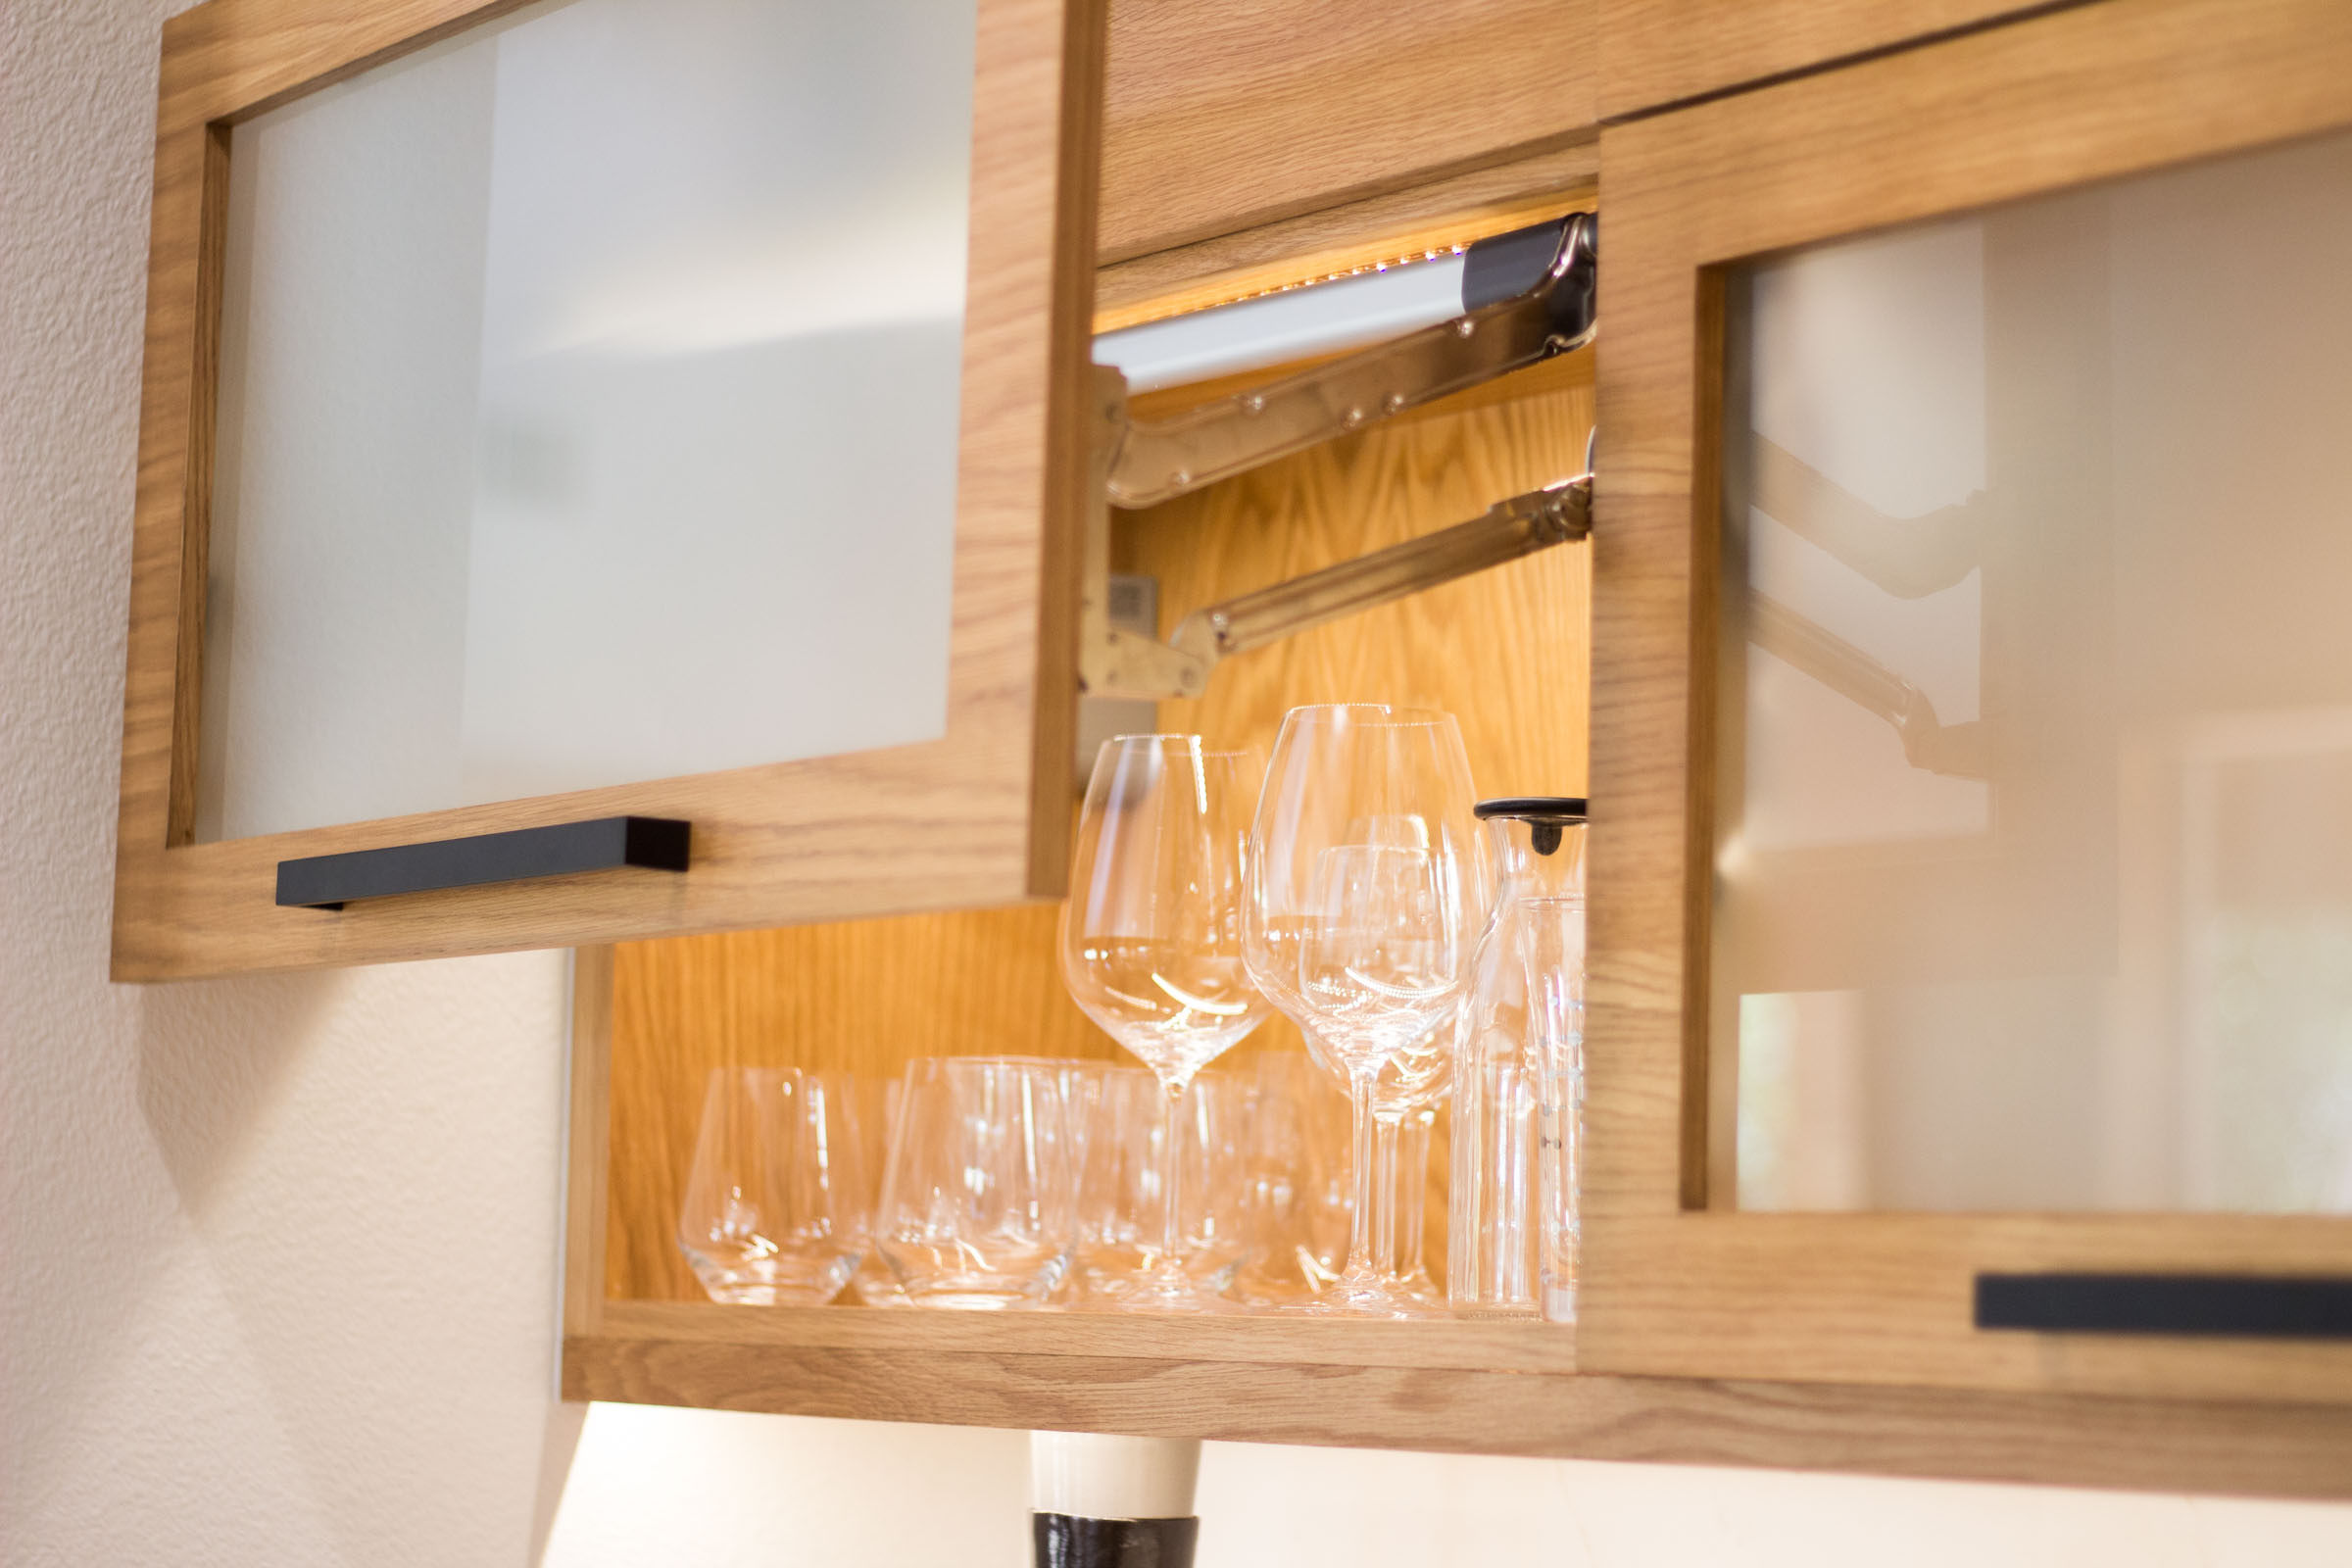 Wine glasses, frosted glass cabinet, vertical lift cabinet door, blonde wood